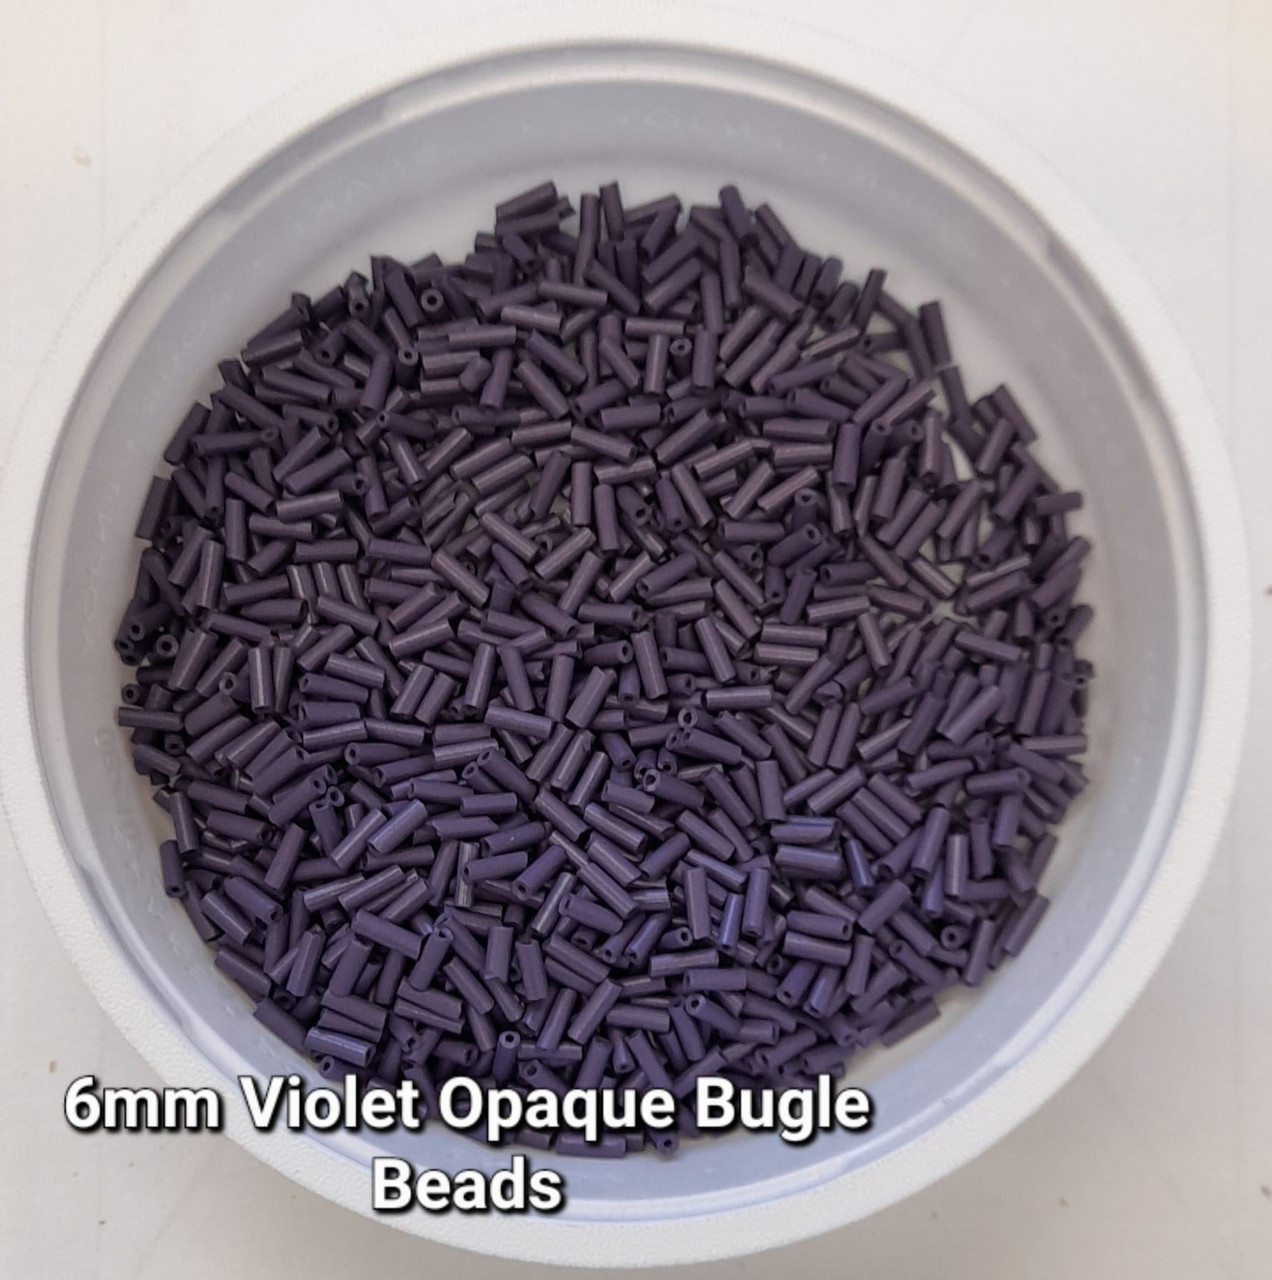 50g glass bugle beads - Violet Opaque - approx 6mm